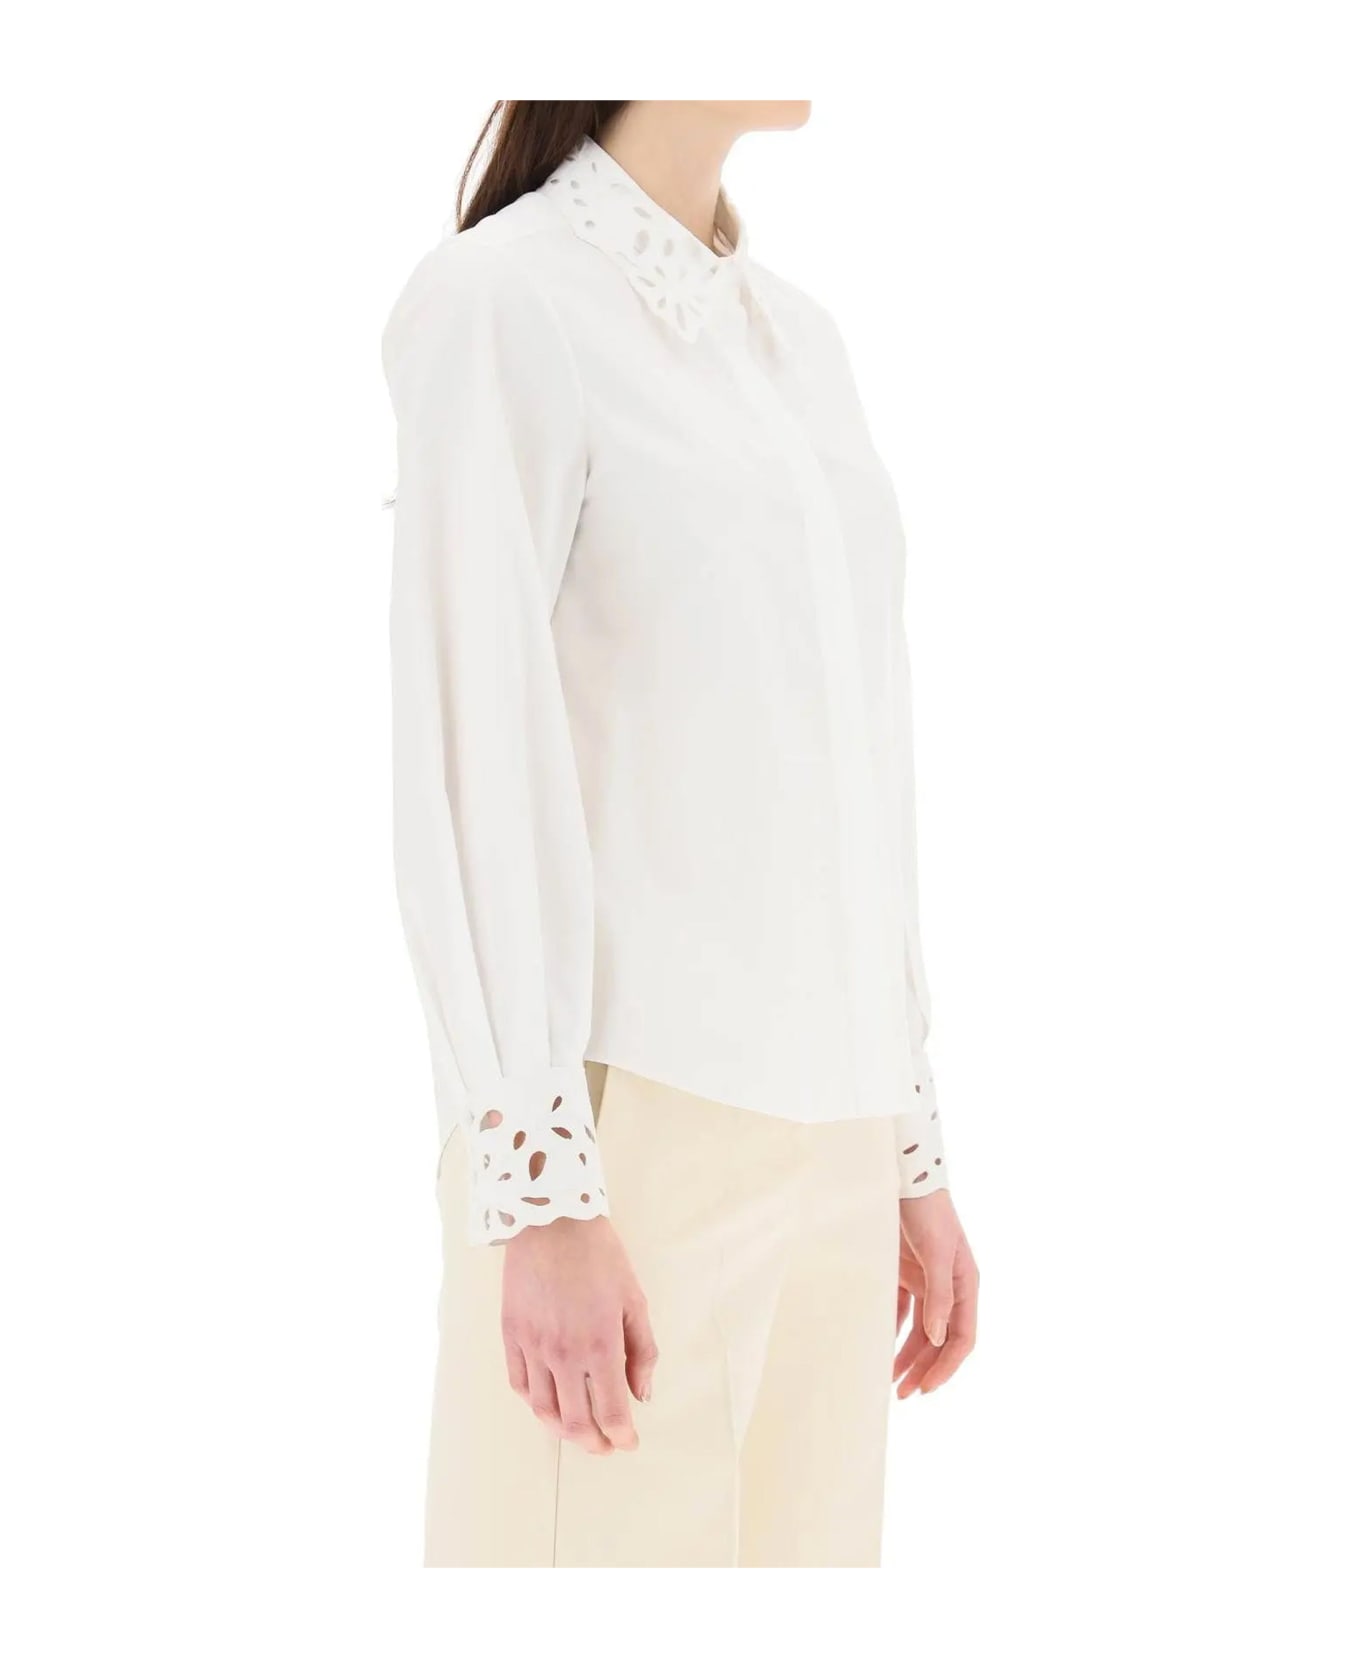 Chloé Cotton Embroidered Shirt - White